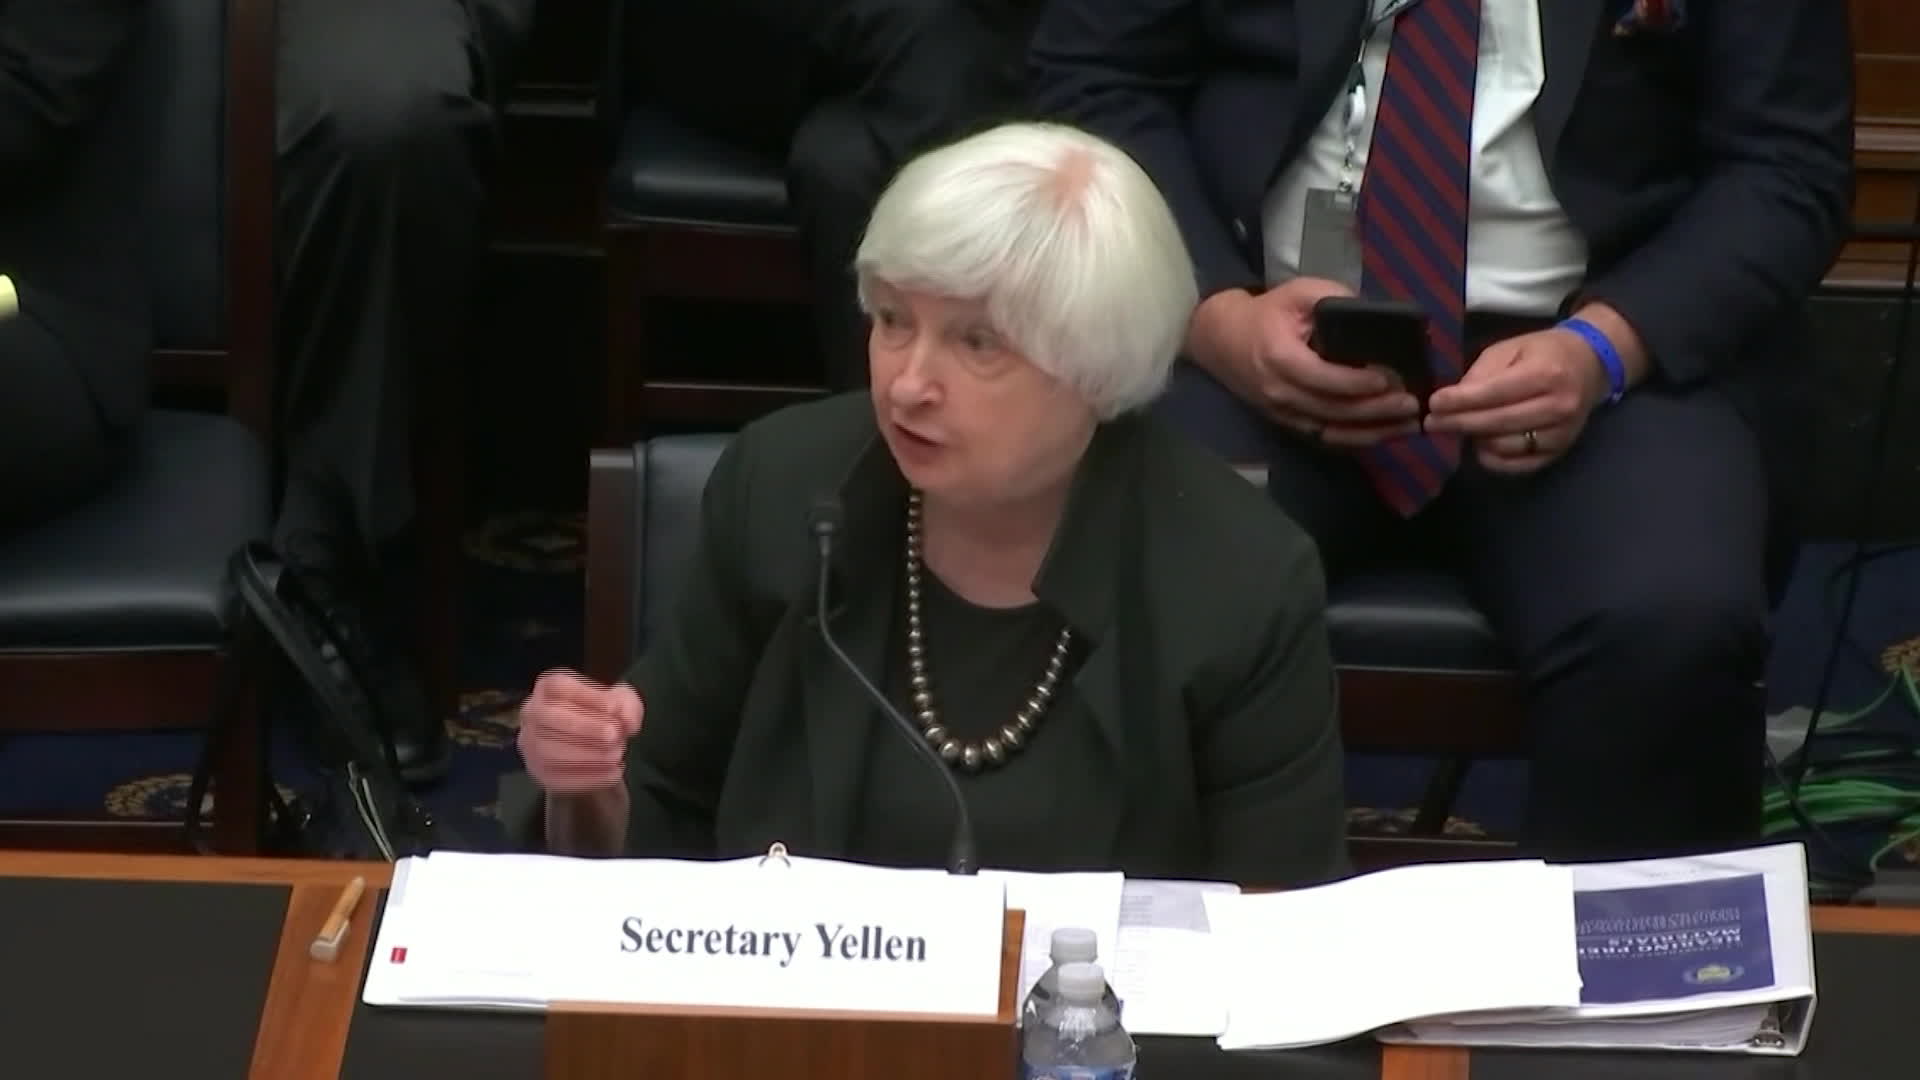 Video: Bitcoin Sign Guy Tells All About Infamous Janet Yellen Photobomb - CoinDesk